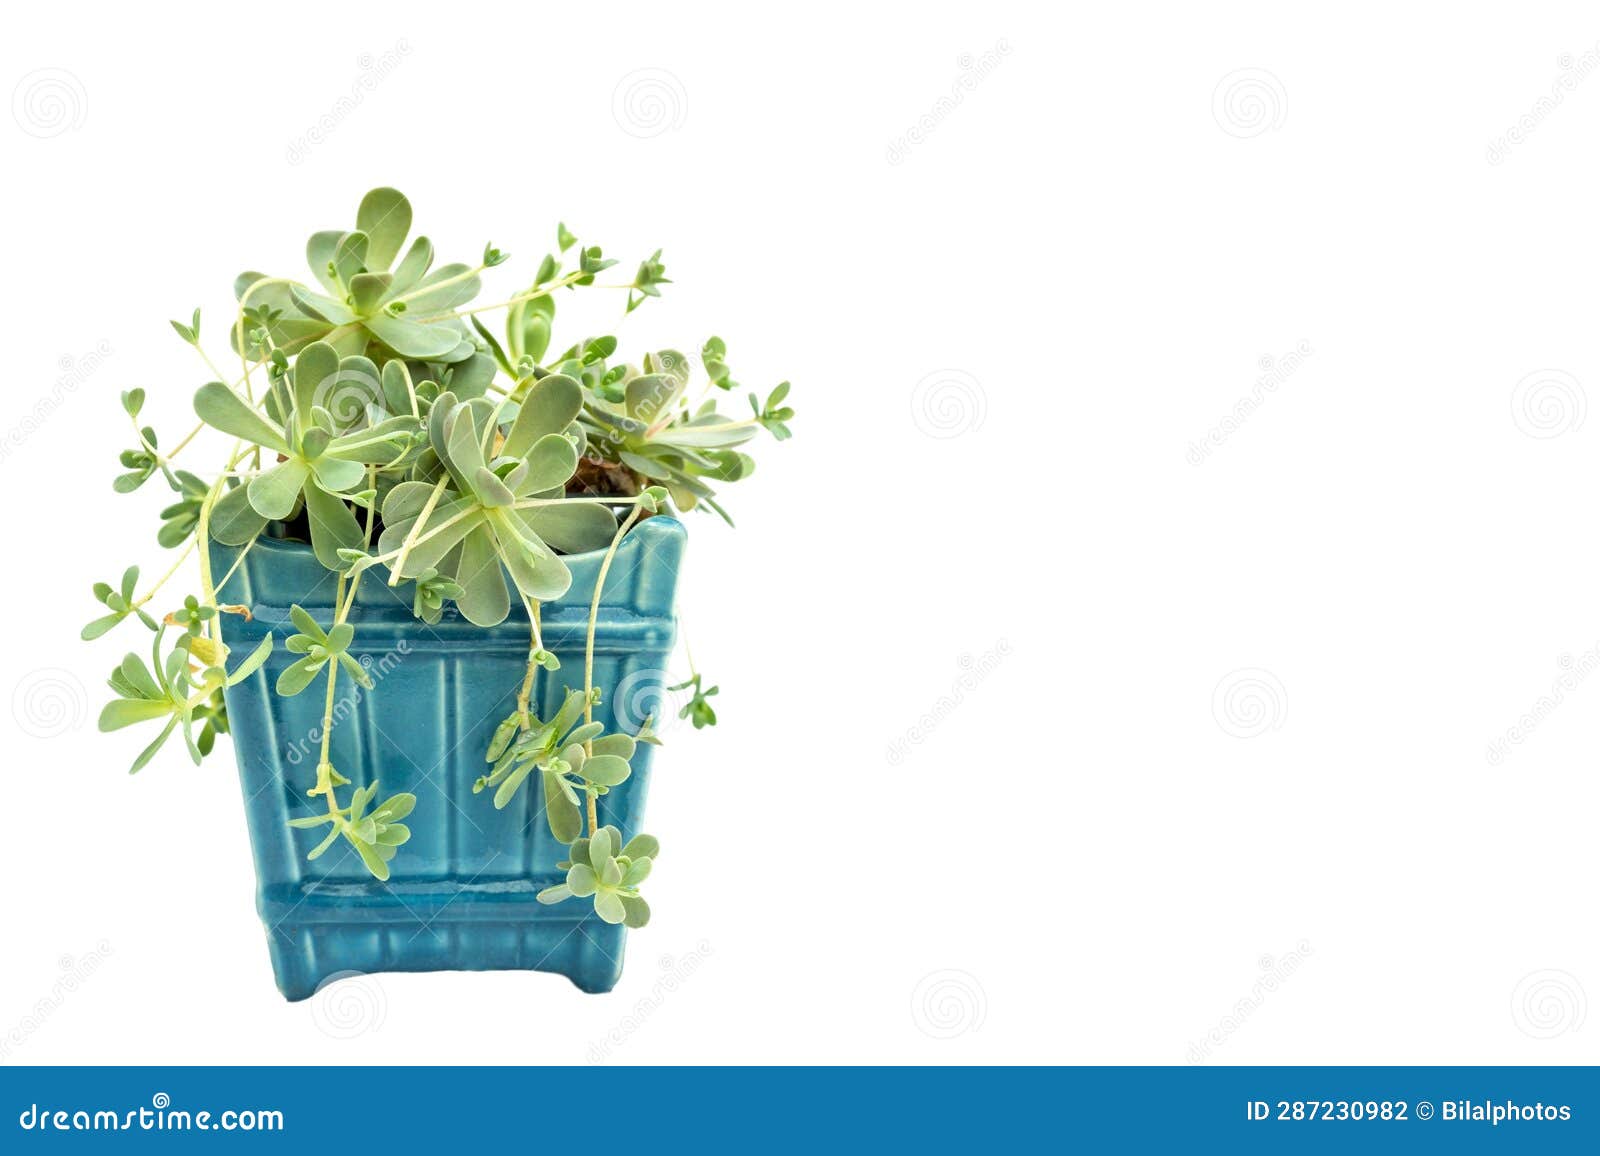 cinese dunce cap or orostachys iwarenge plant  on white background with copy space